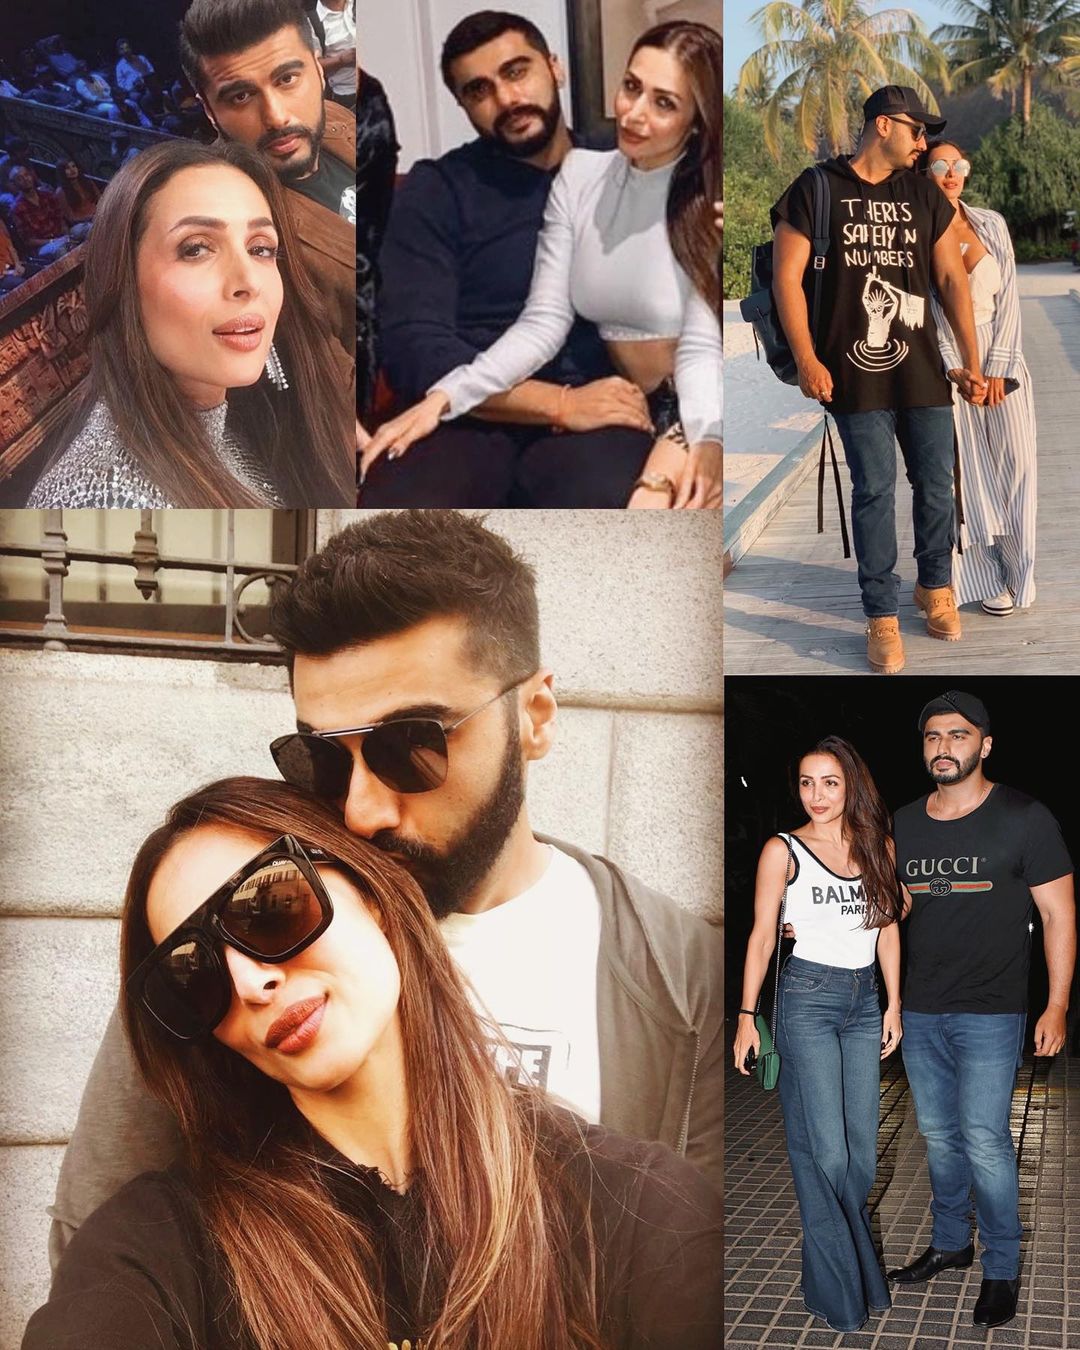 Malaika Arora And Arjun Kapoor's Love Story: A Look At Their Mushy Romance In Pictures